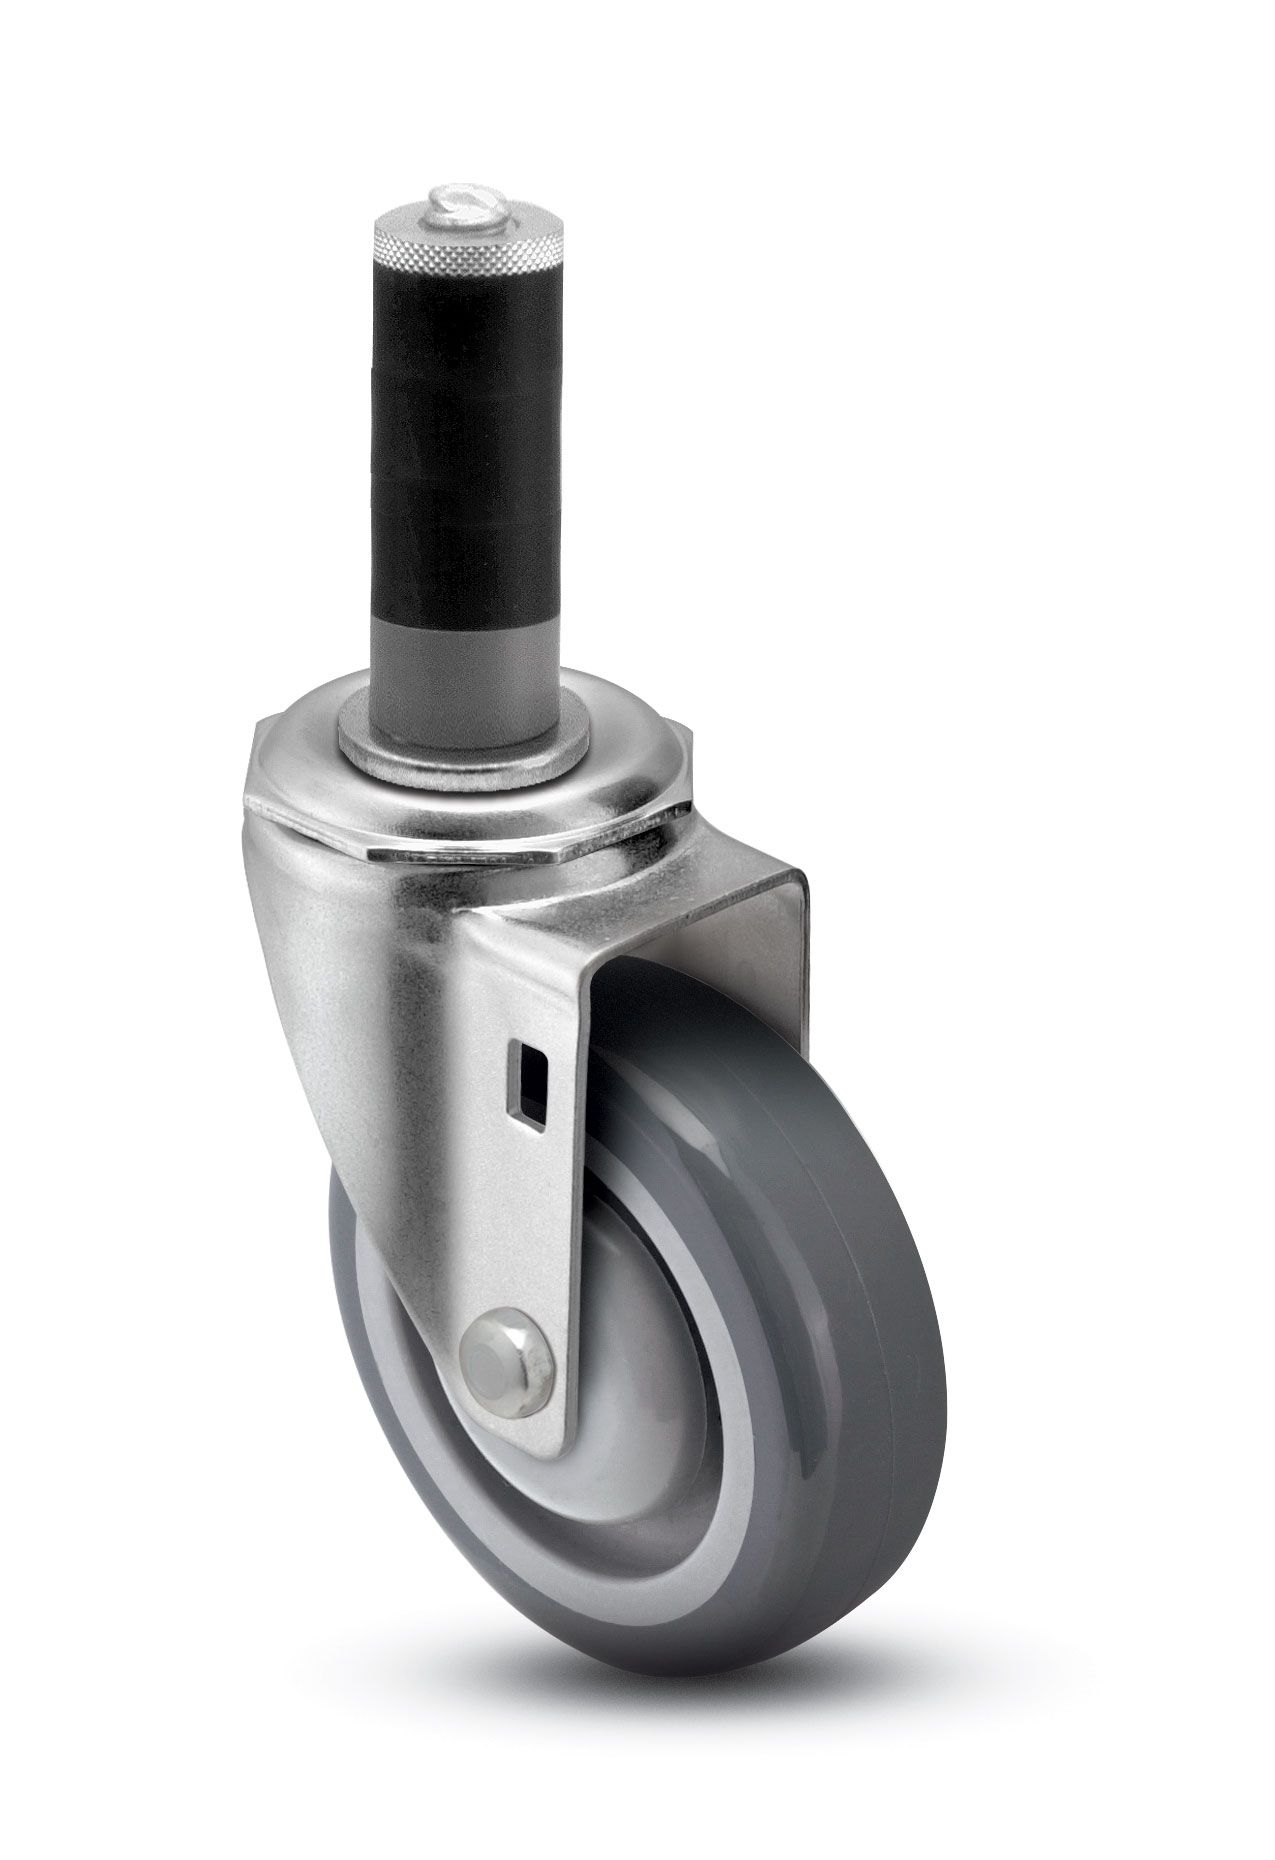 Caster; Swivel; 5" x 1-1/4"; PolyU on PolyO (Gray); Expandable Adapter (1-5/8" - 1-11/16" ID tubing); Zinc; Precision Ball Brng; 300#; Total Lock; Dust Cover (Item #65048)